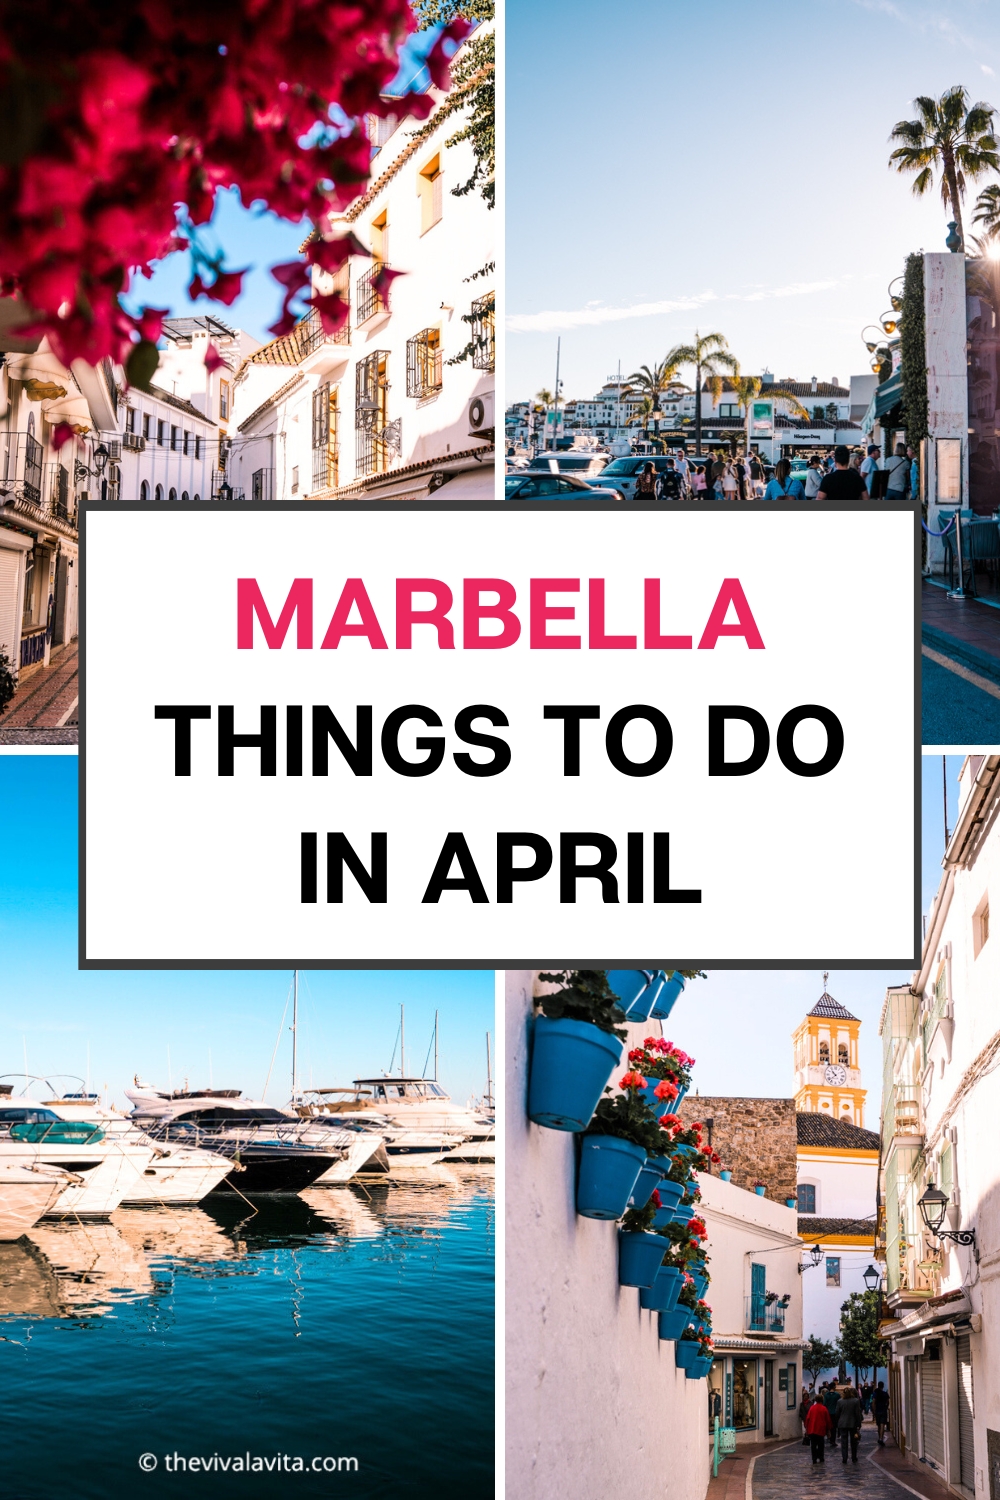 pinterest image showing the streets of marbella old town, puerto banus and churches in marbella, with a headline: marbella things to do in April